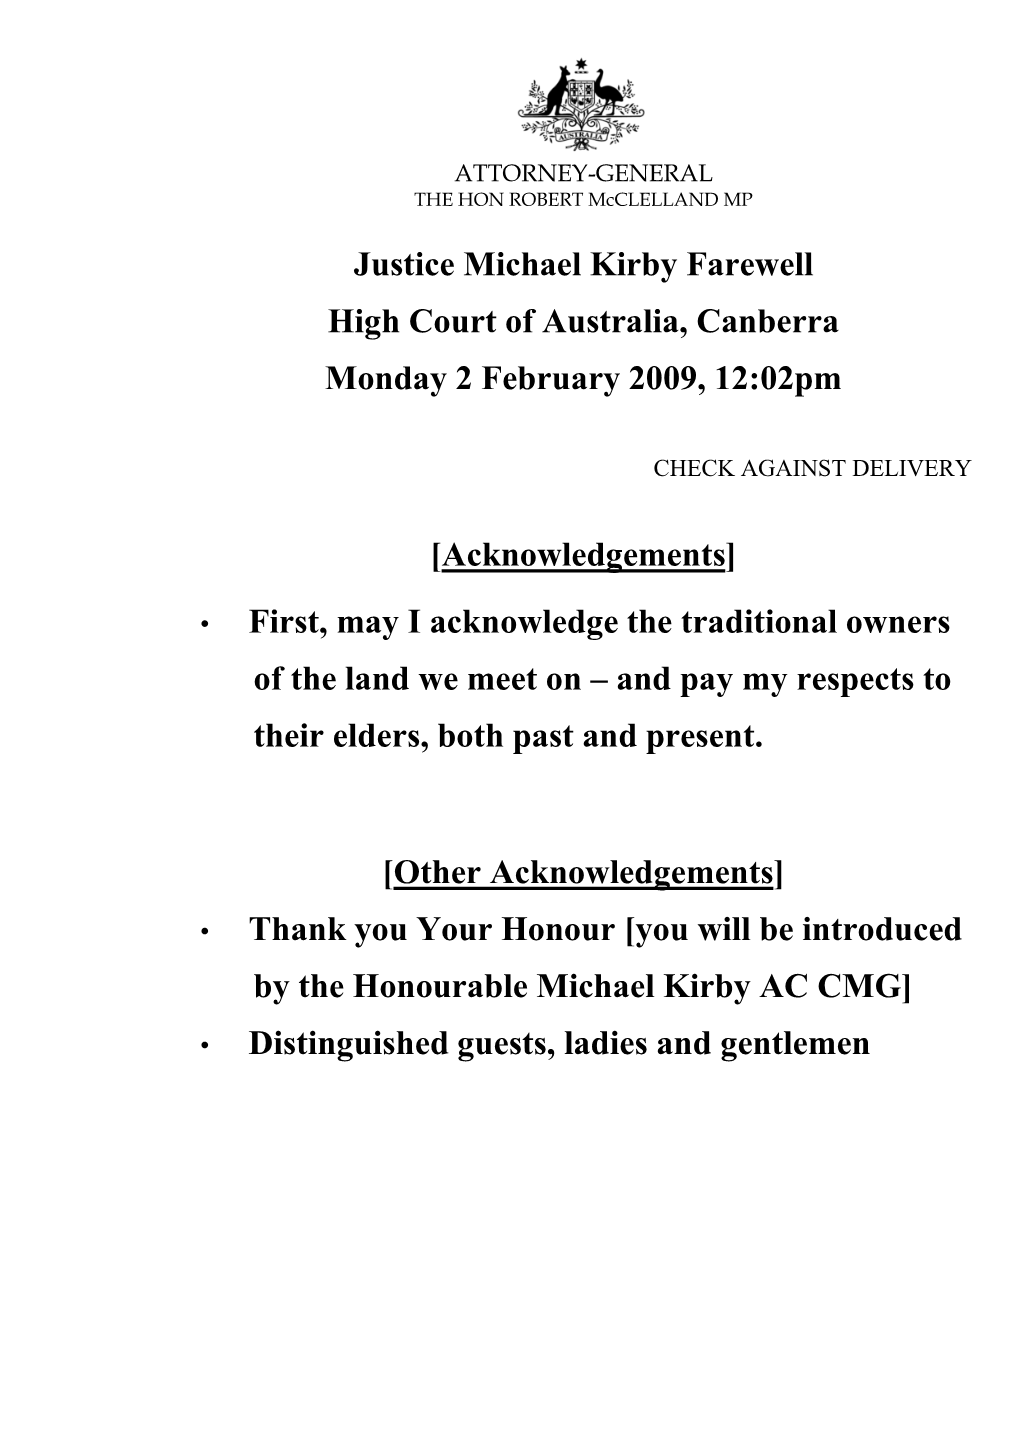 Justice Michael Kirby Farewell High Court of Australia, Canberra Monday 2 February 2009, 12:02Pm [Acknowledgements] • First, M